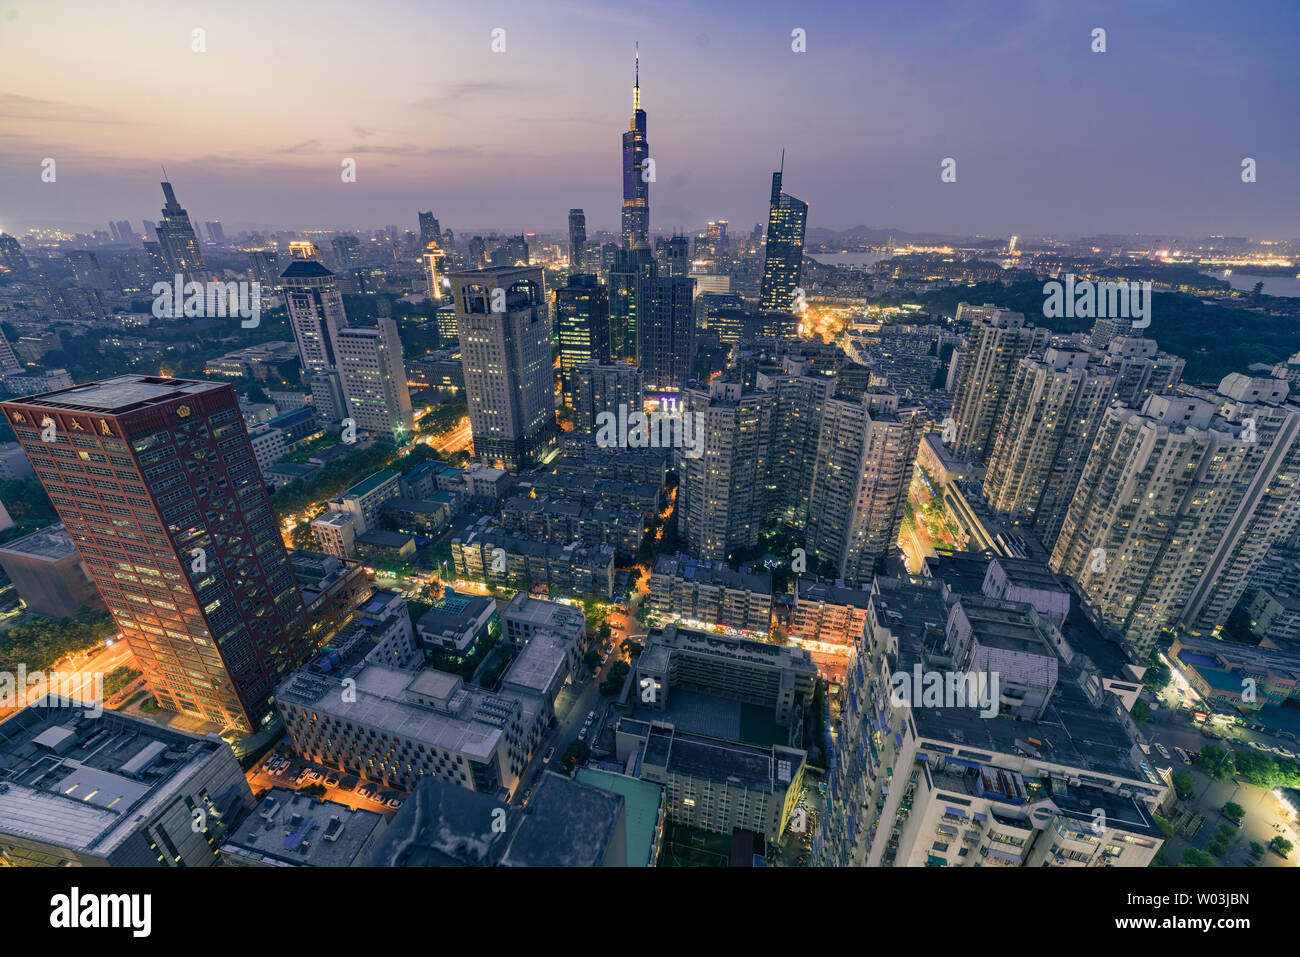 The city of Jinling. Stock Photo